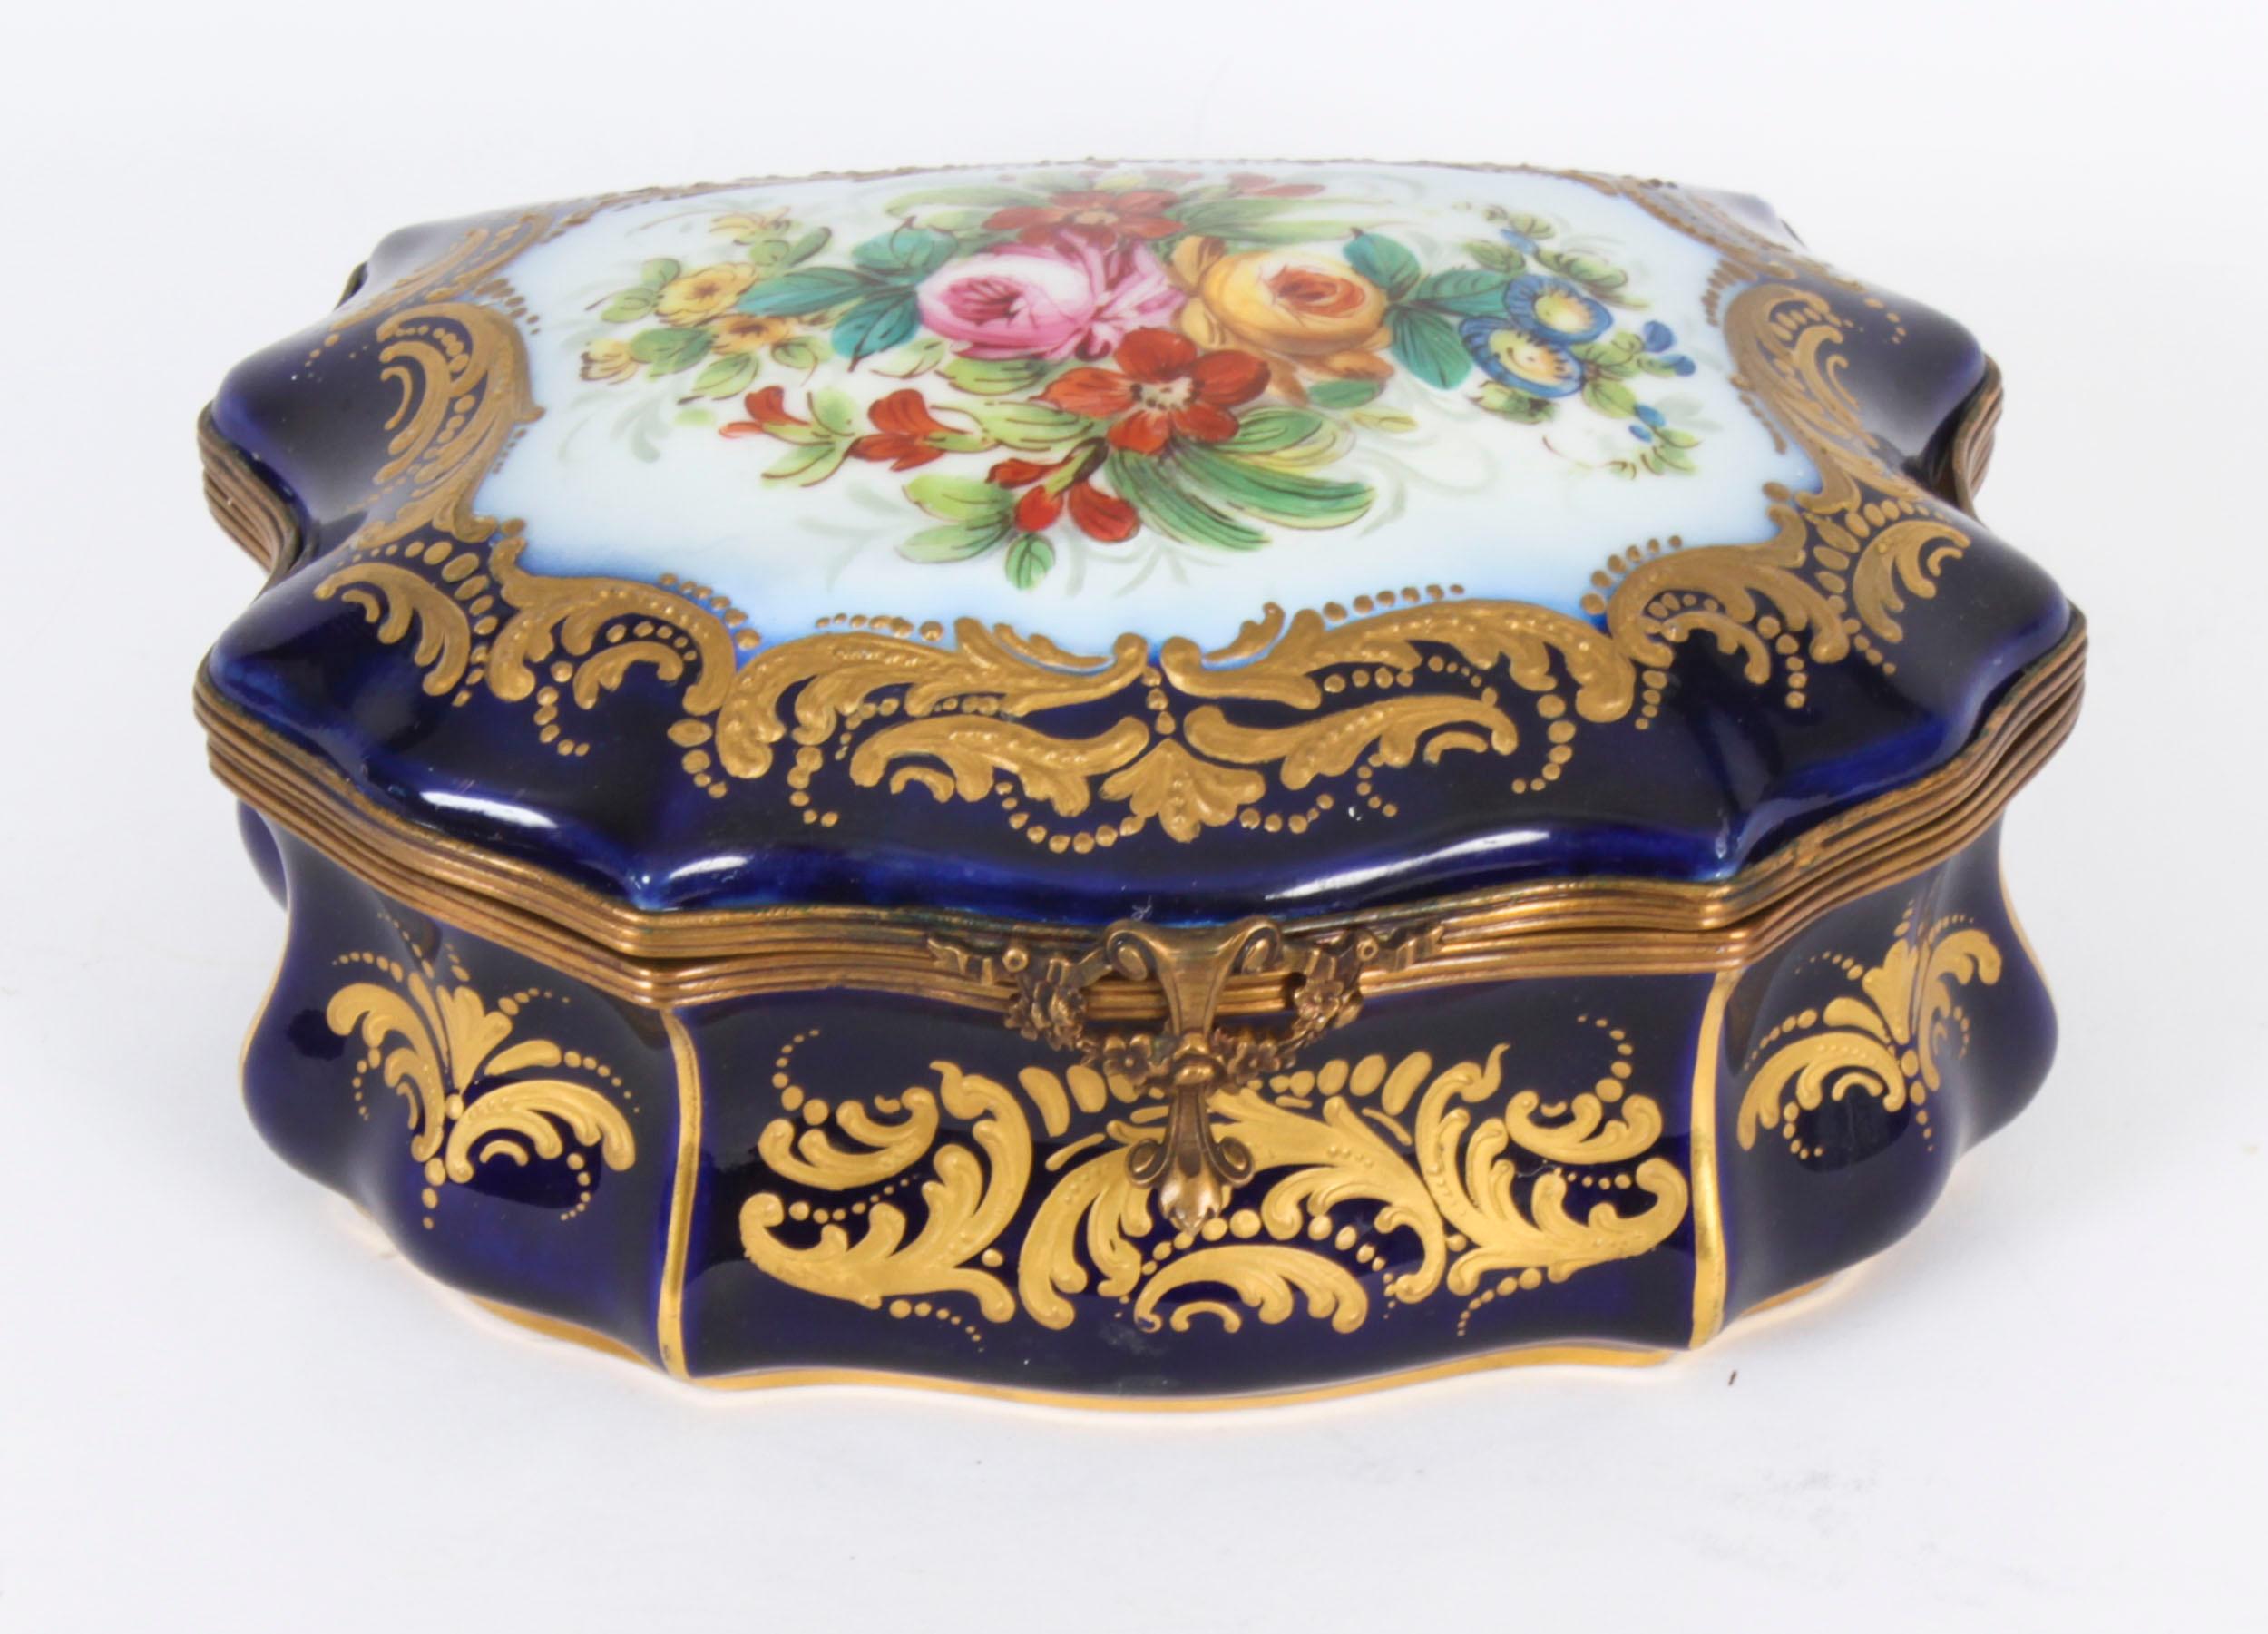 Antique French Sevres Cobalt Blue Porcelain Casket 19th Century In Good Condition For Sale In London, GB